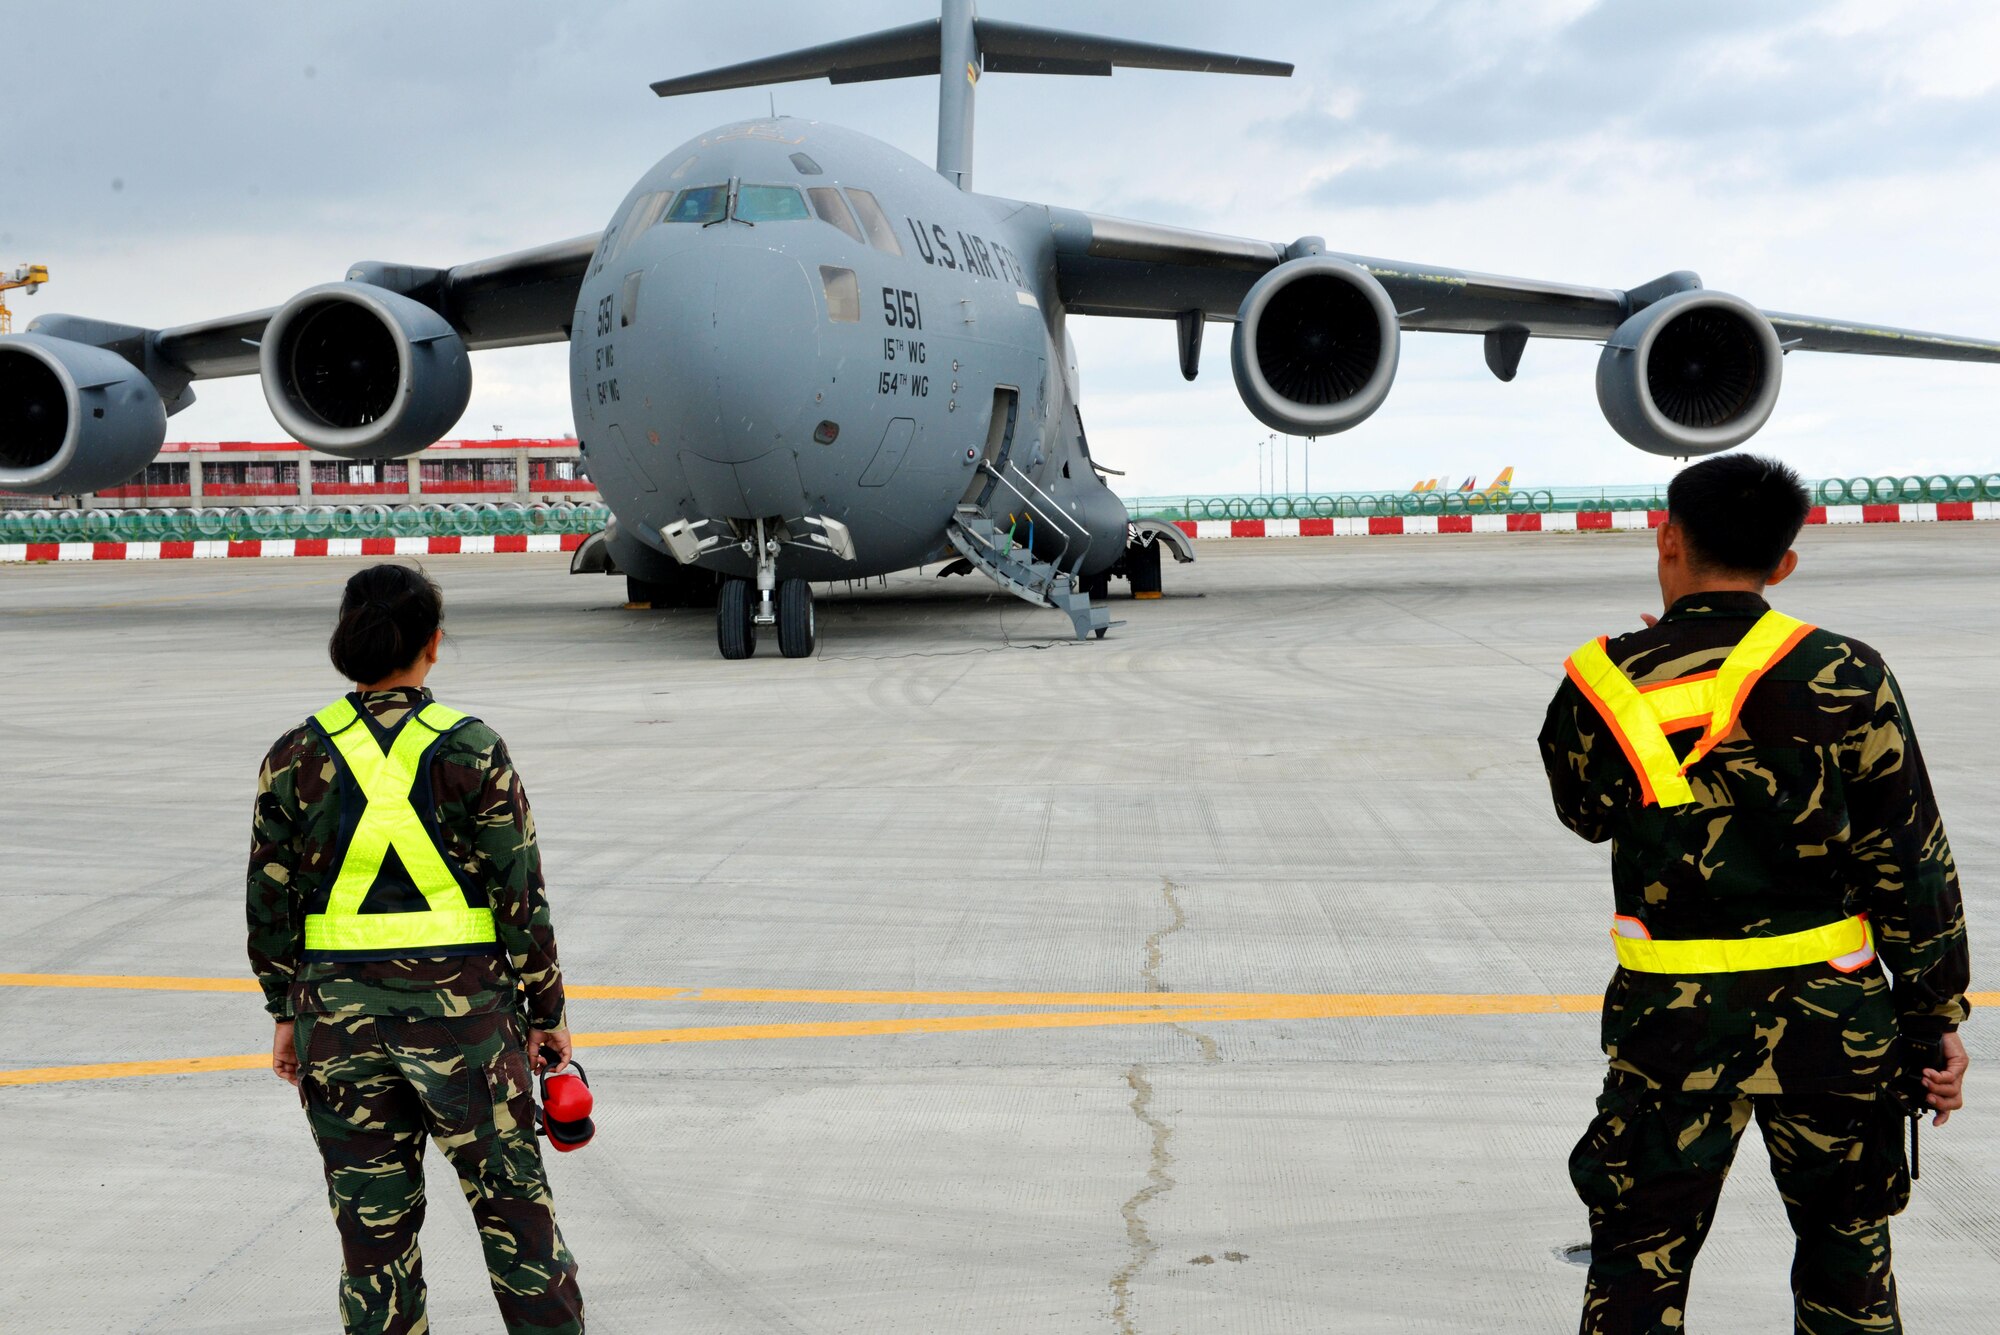 Members of the Philippines Air Force observe a U.S. Air Force C-17 at Mactan Air Base, Philippines, Sept. 24, 2016. The military members were in Mactan in support of U.S. Pacific Command’s ongoing Air Contingent mission. The goal of the rotation is for Philippine military and civilian leaders to work with their U.S. counterparts to improve airlift capabilities across the spectrum of military operations and to solidify long-standing relationships in the region. (U.S. Air Force photo by Capt. Mark Lazane)